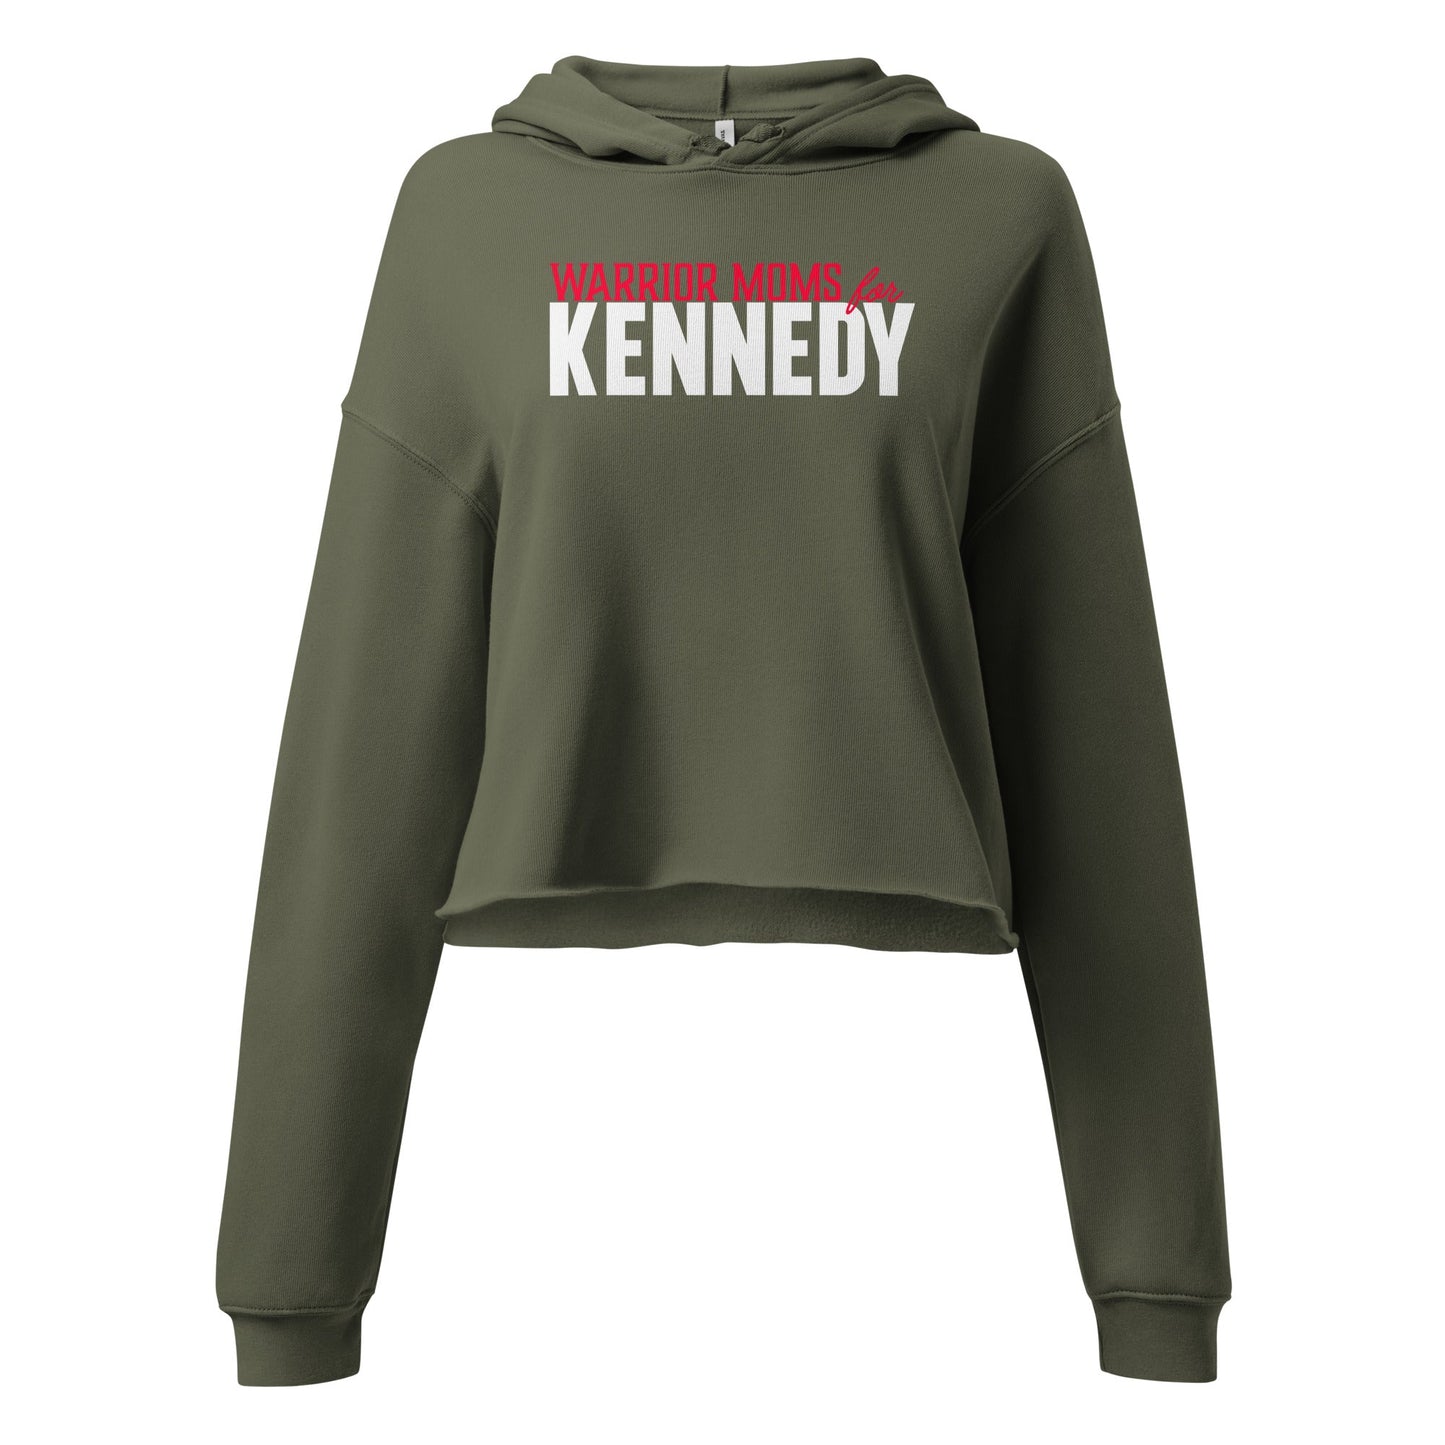 Warrior Moms for Kennedy Crop Hoodie - TEAM KENNEDY. All rights reserved